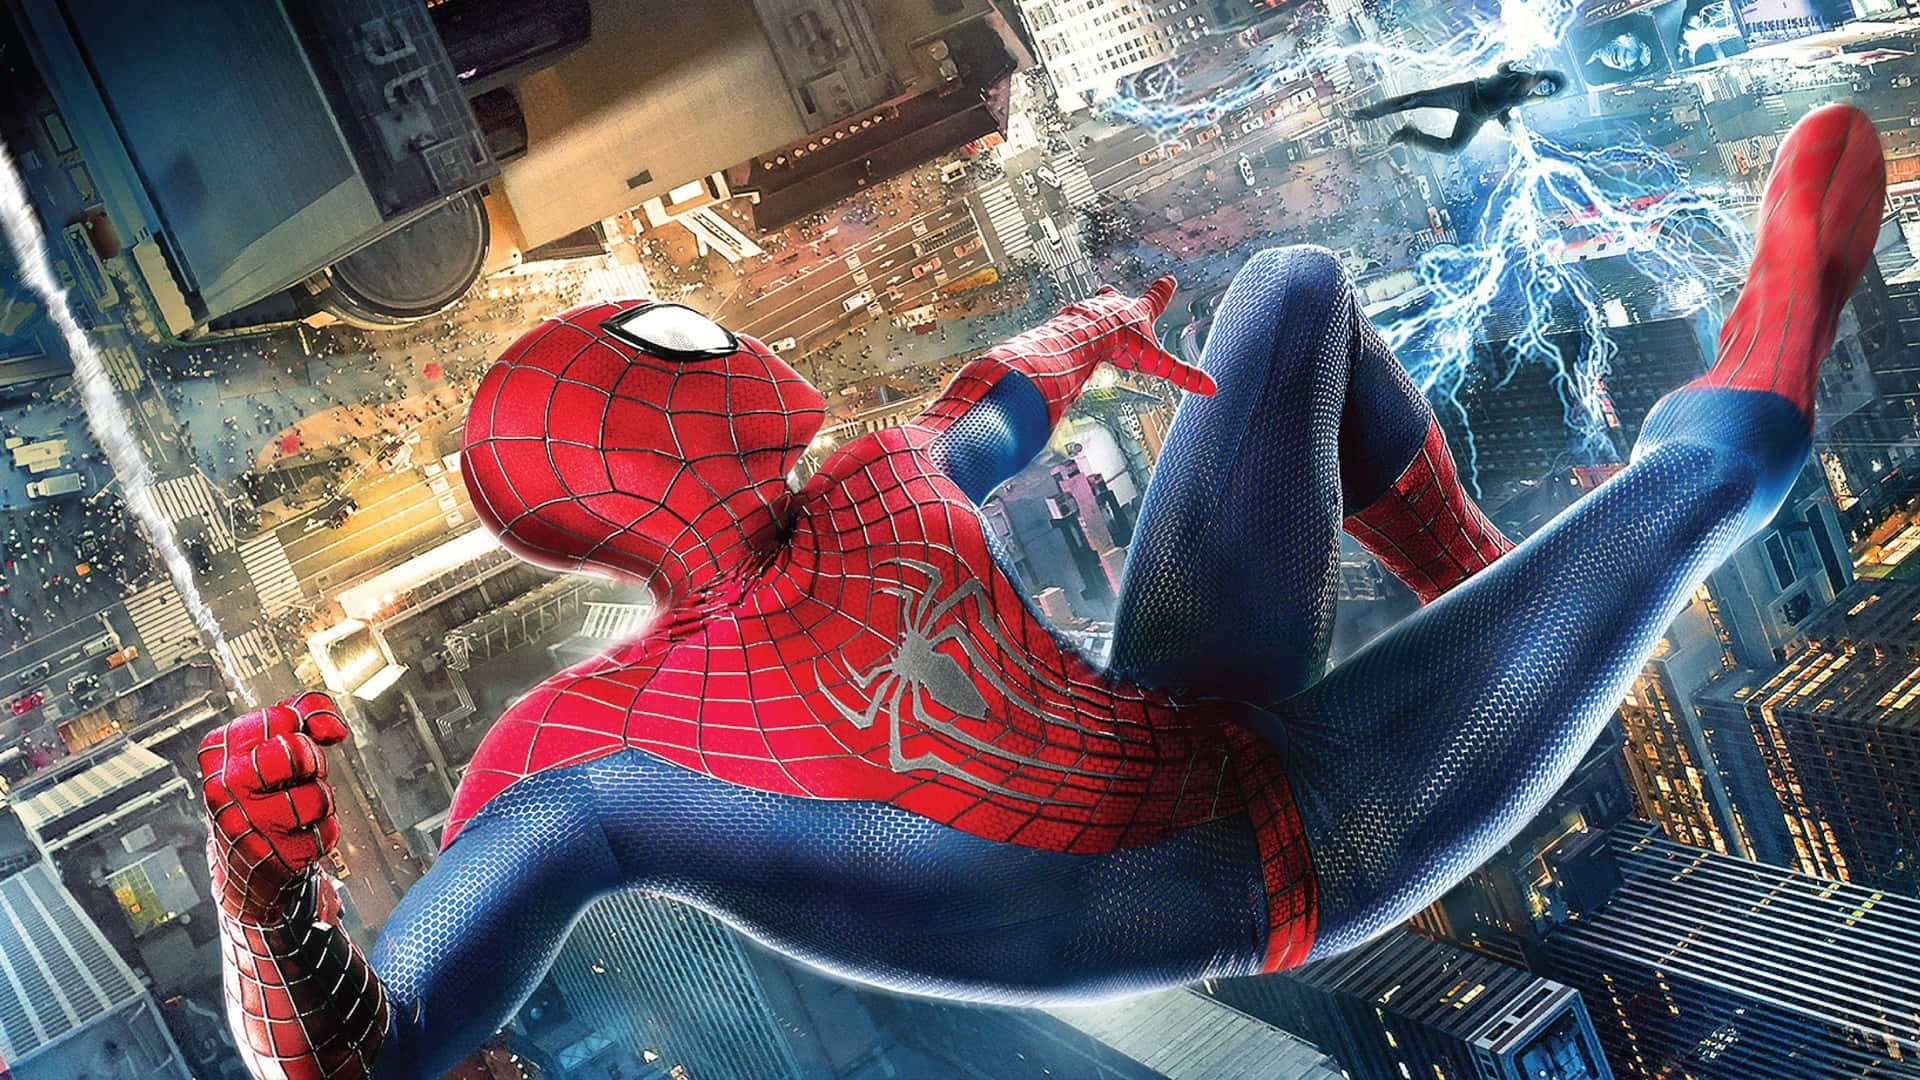 Spiderman 2 - Spiderman is back to save the day! Wallpaper